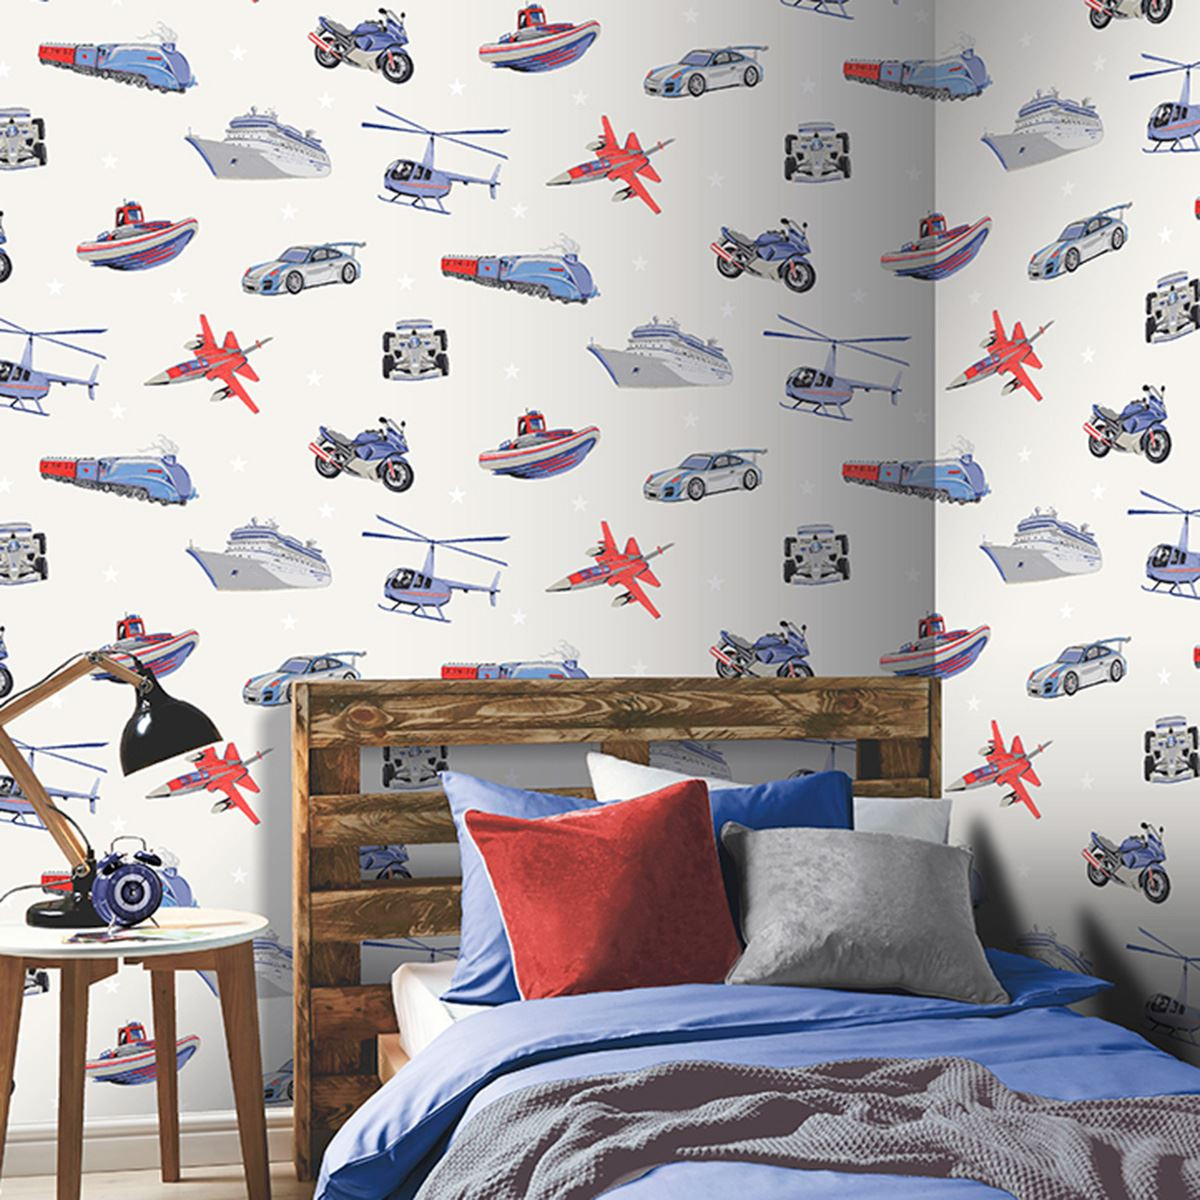 Wallpaper Borders For Bedroom
 TRANSPORT AND VEHICLES THEMED WALLPAPER & BORDERS BEDROOM